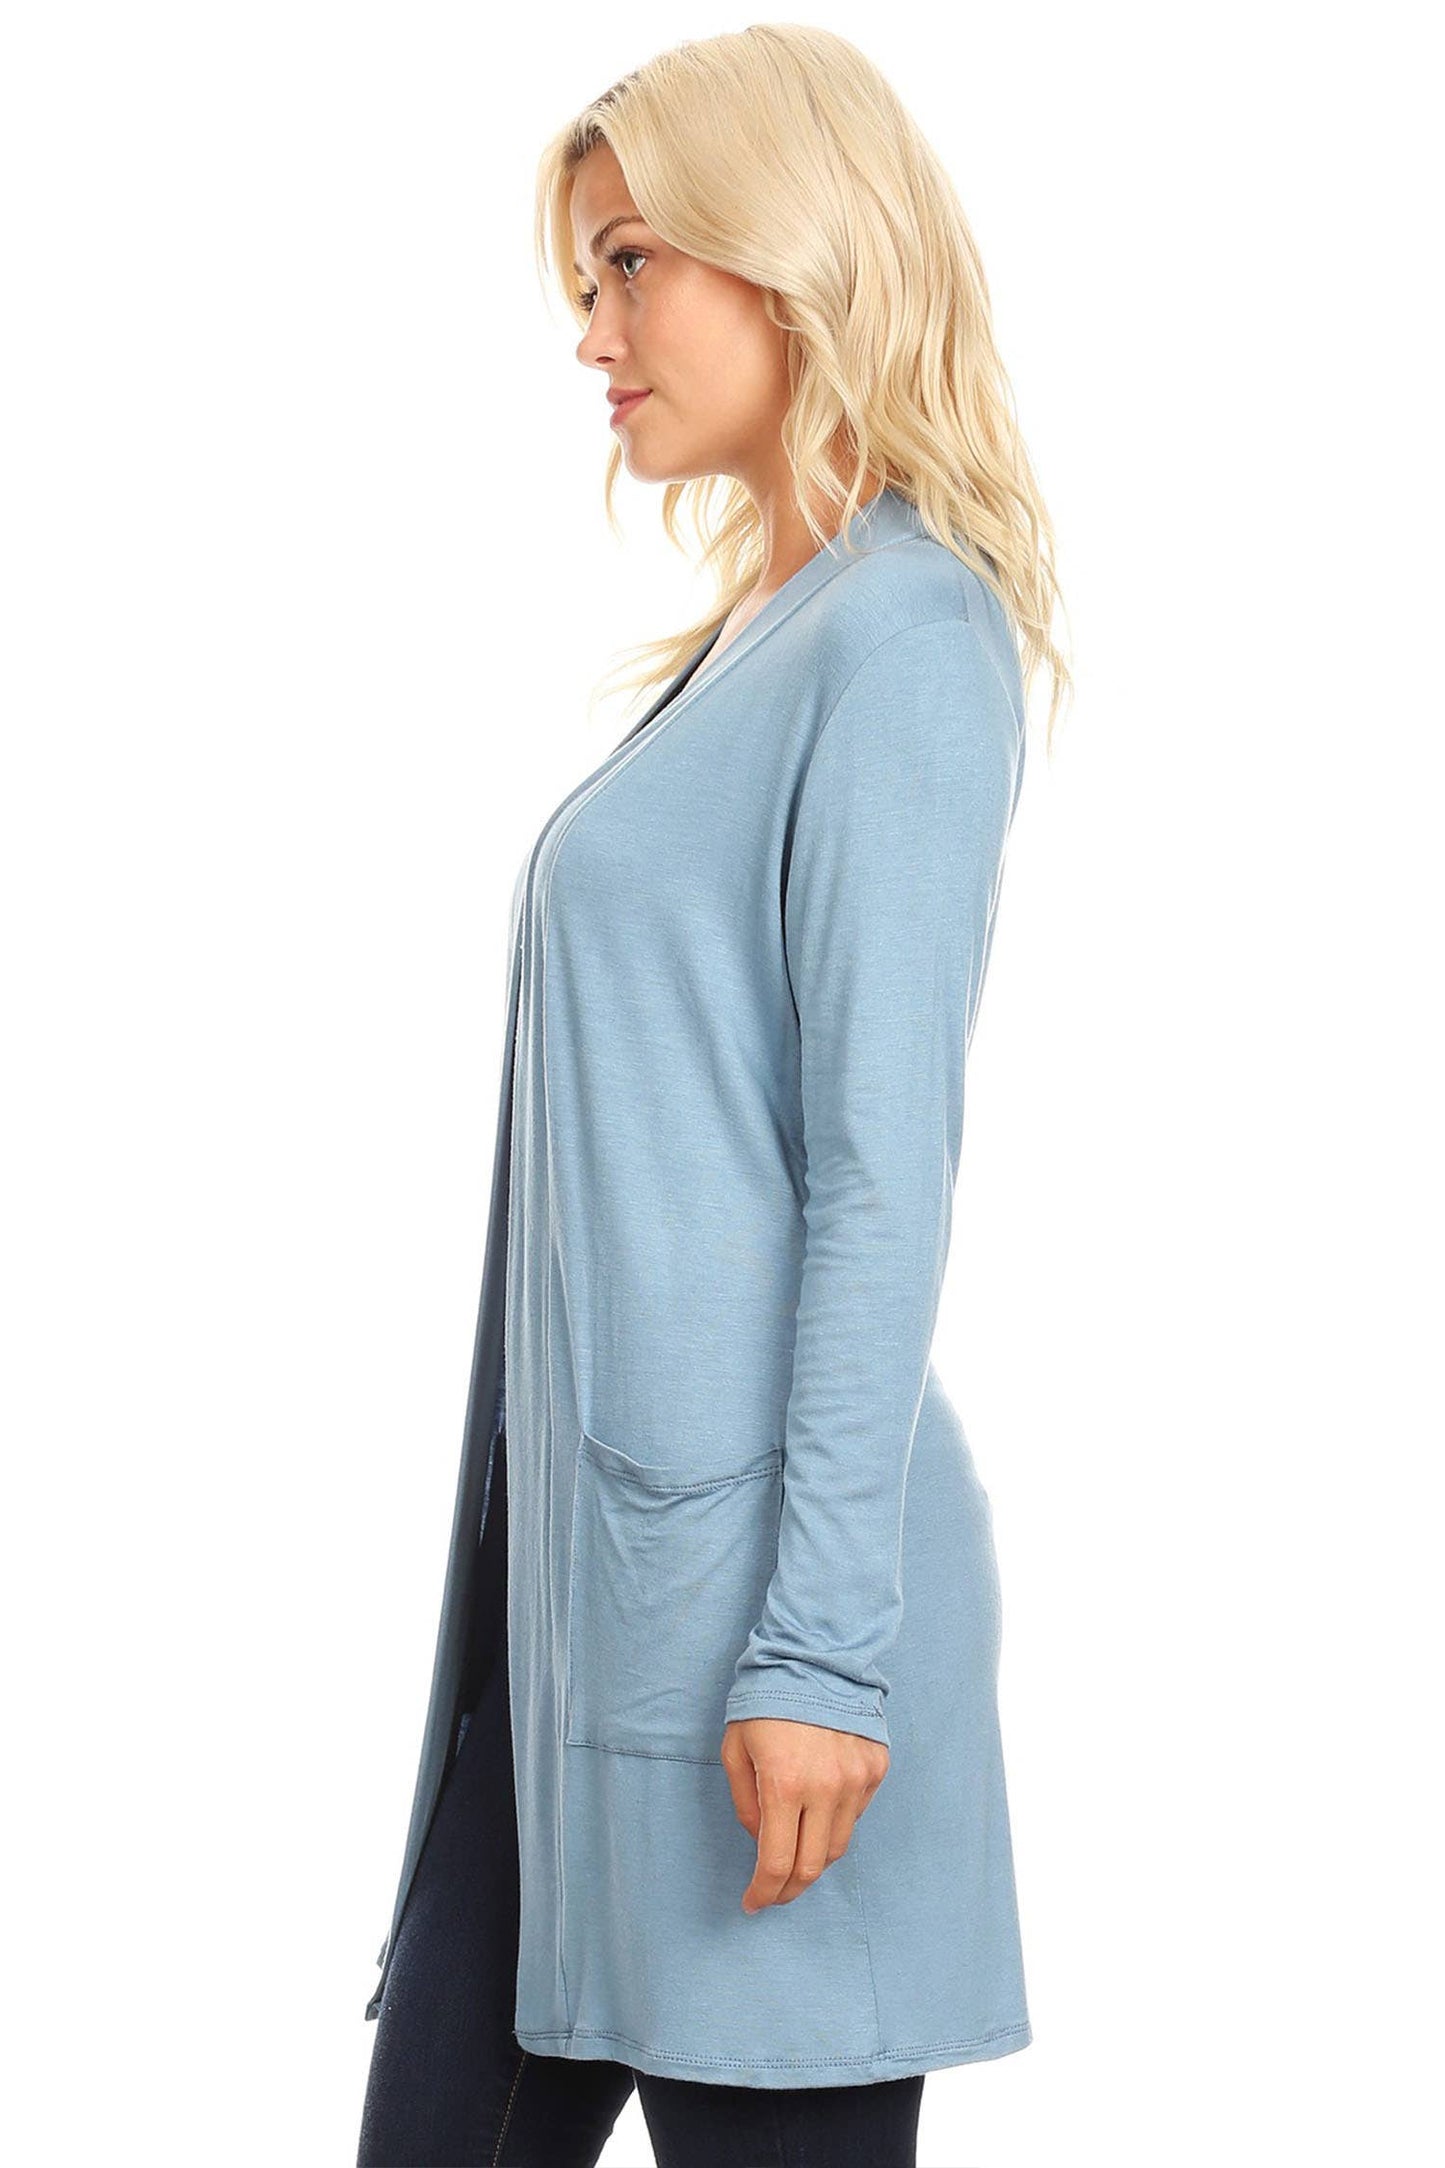 Women's Long Sleeves Side Pockets Solid Cardigan (Open Pack): Small / Plum